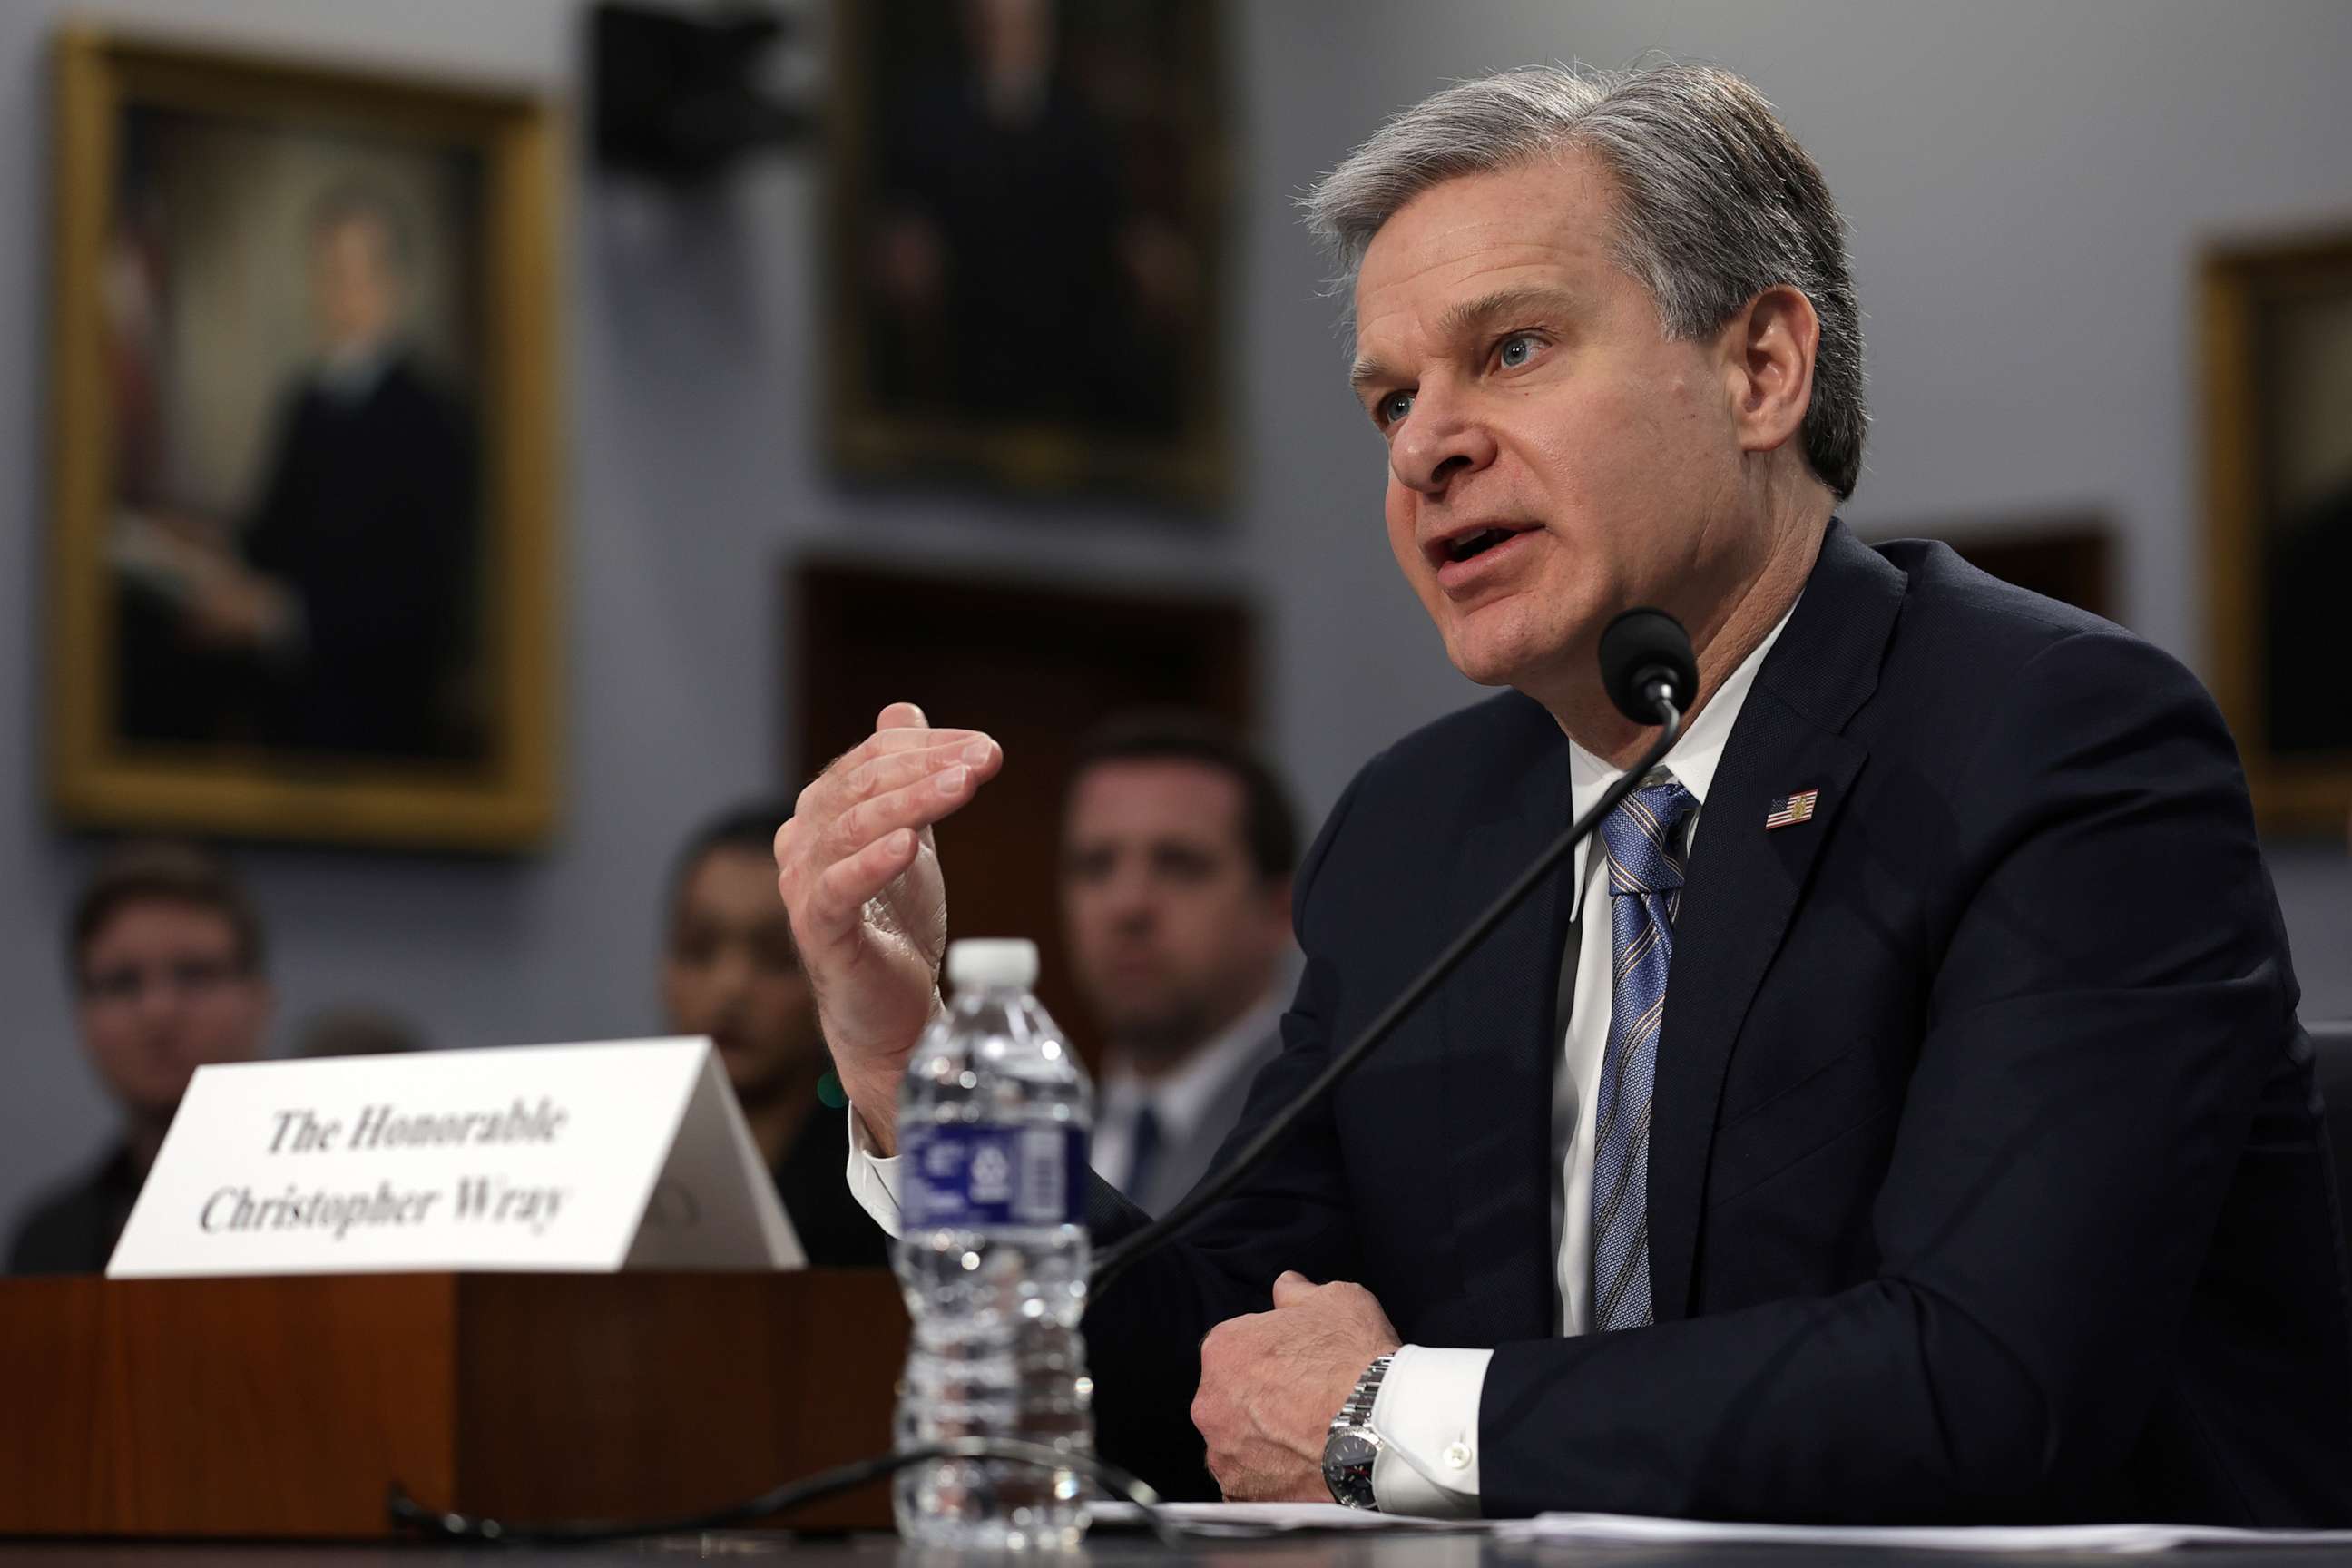 PHOTO: FBI Director Christopher Wray testifies during a hearing before the Commerce, Justice, Science, and Related Agencies Subcommittee of the House Appropriations Committee on Capitol Hill, April 27, 2023, in Washington, D.C.